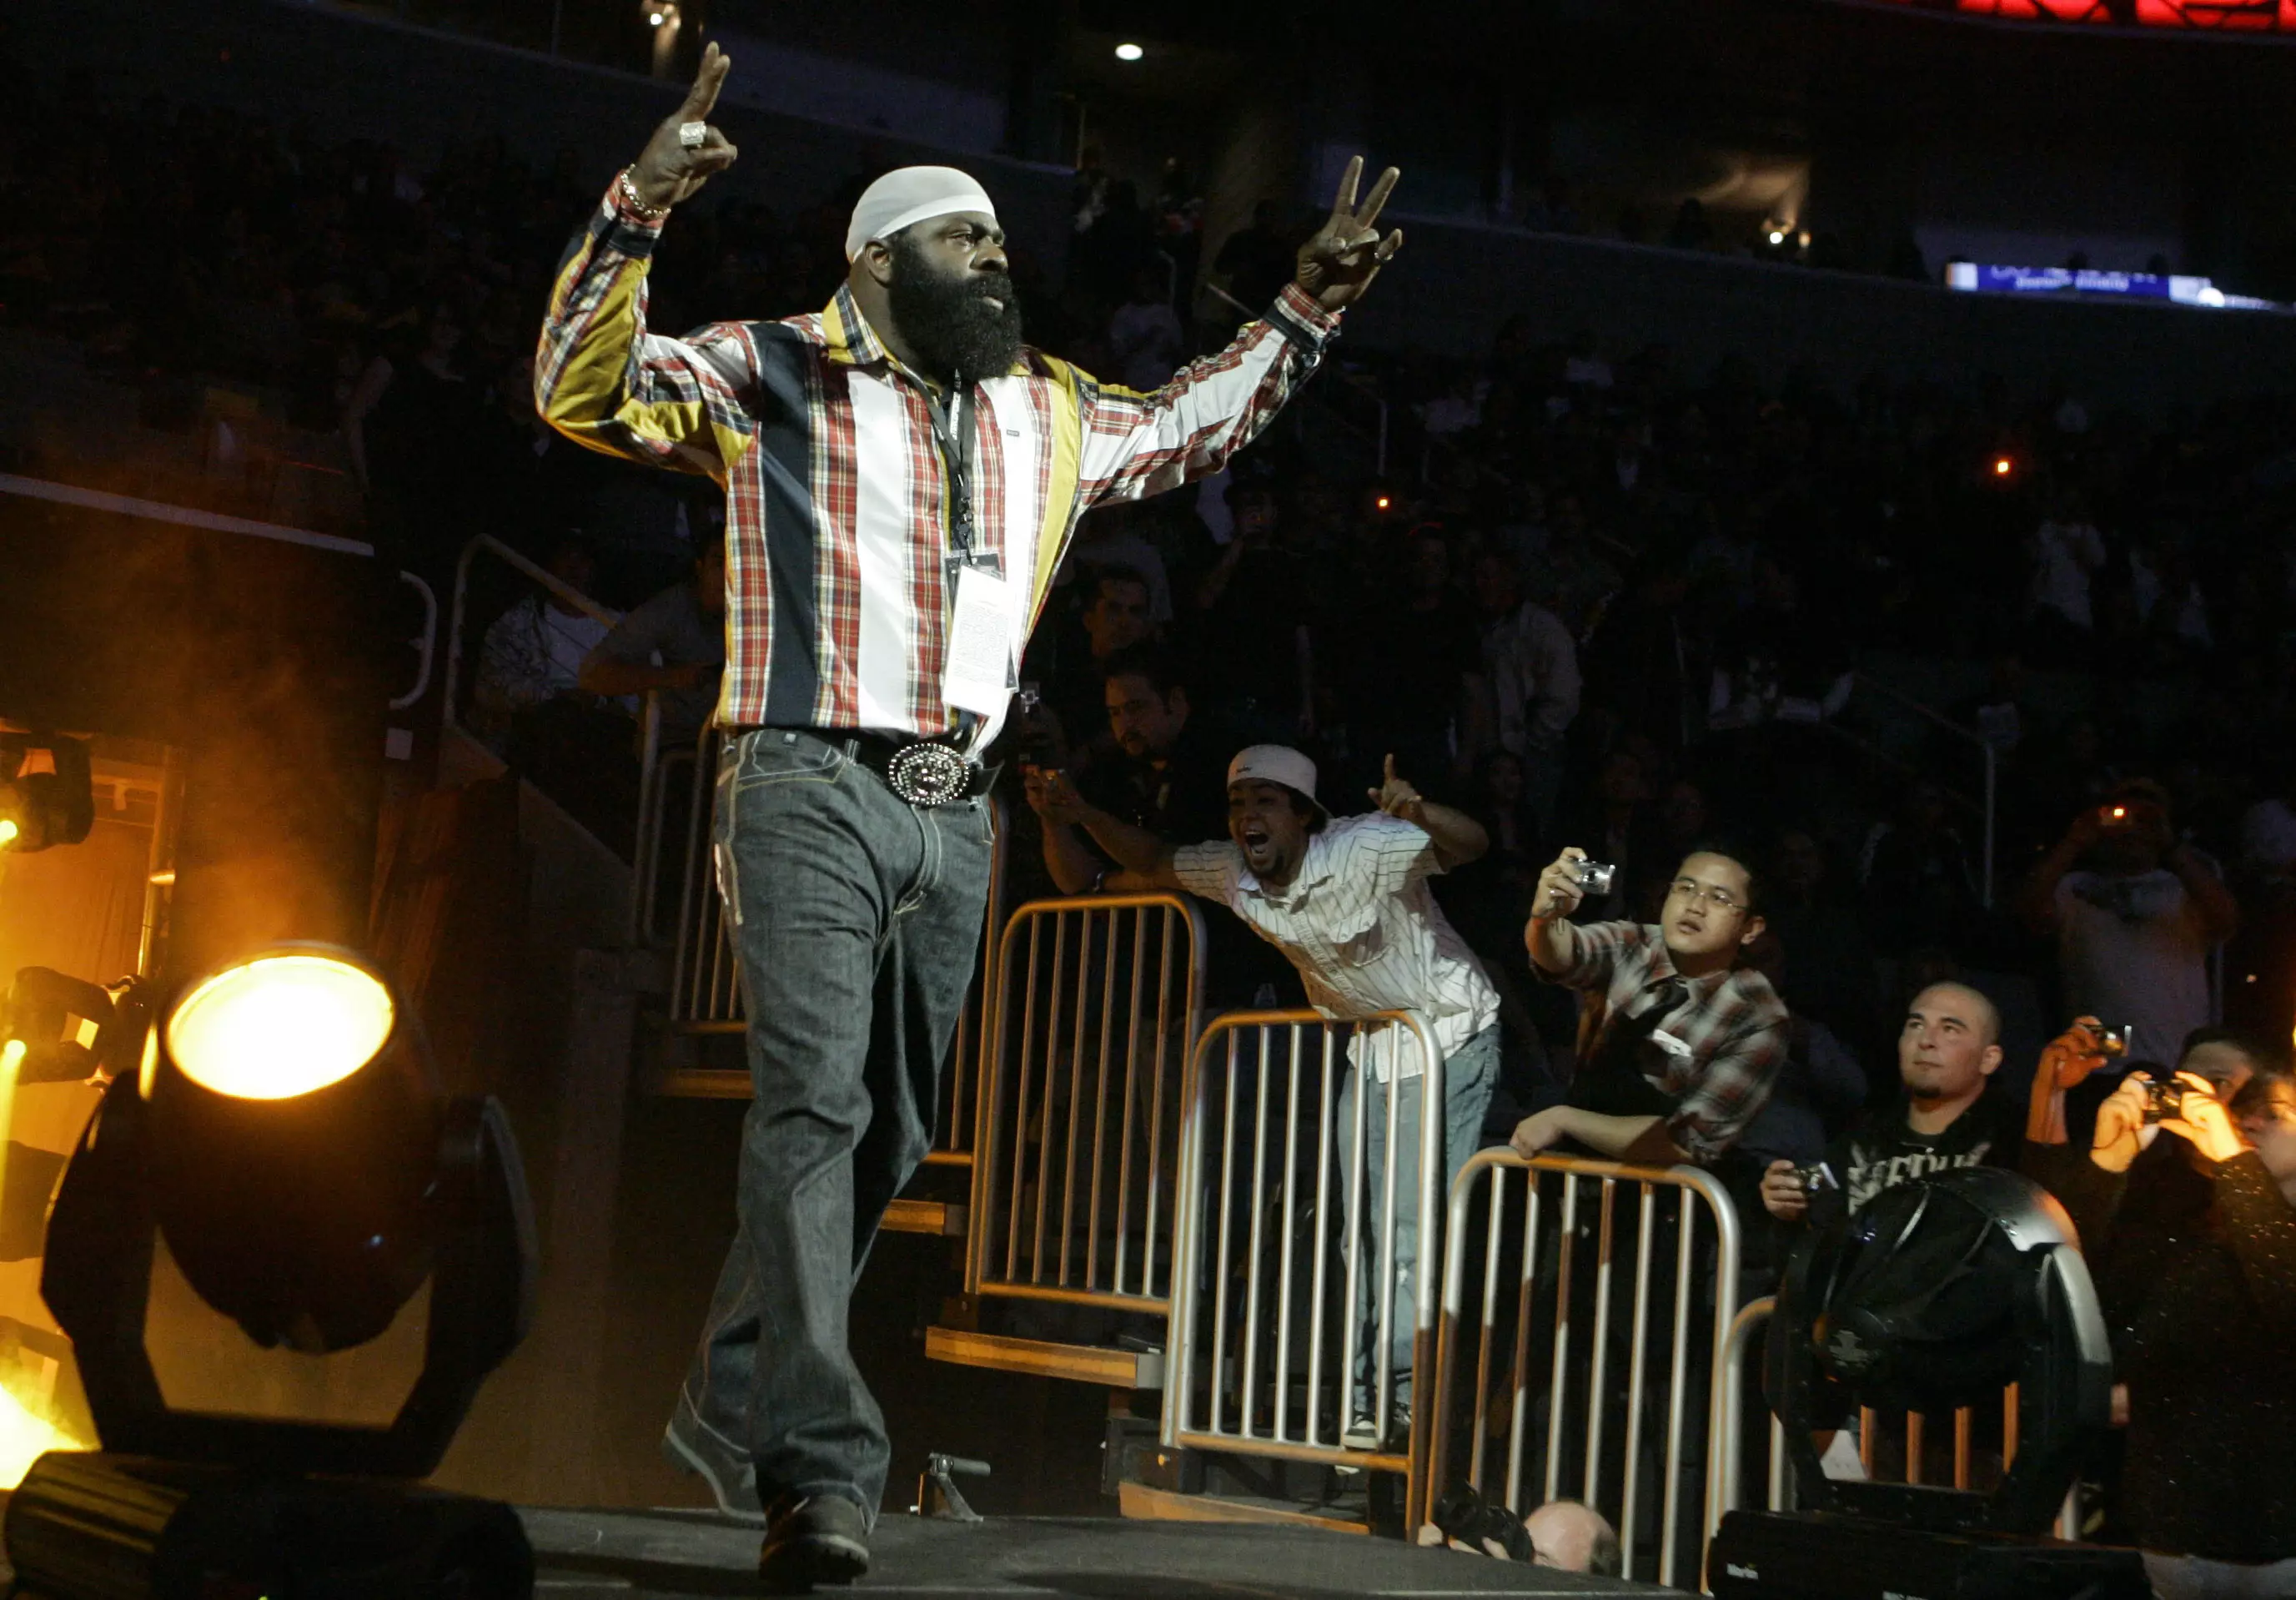 The Tragic Details Of Kimbo Slice's Death Have Been Released